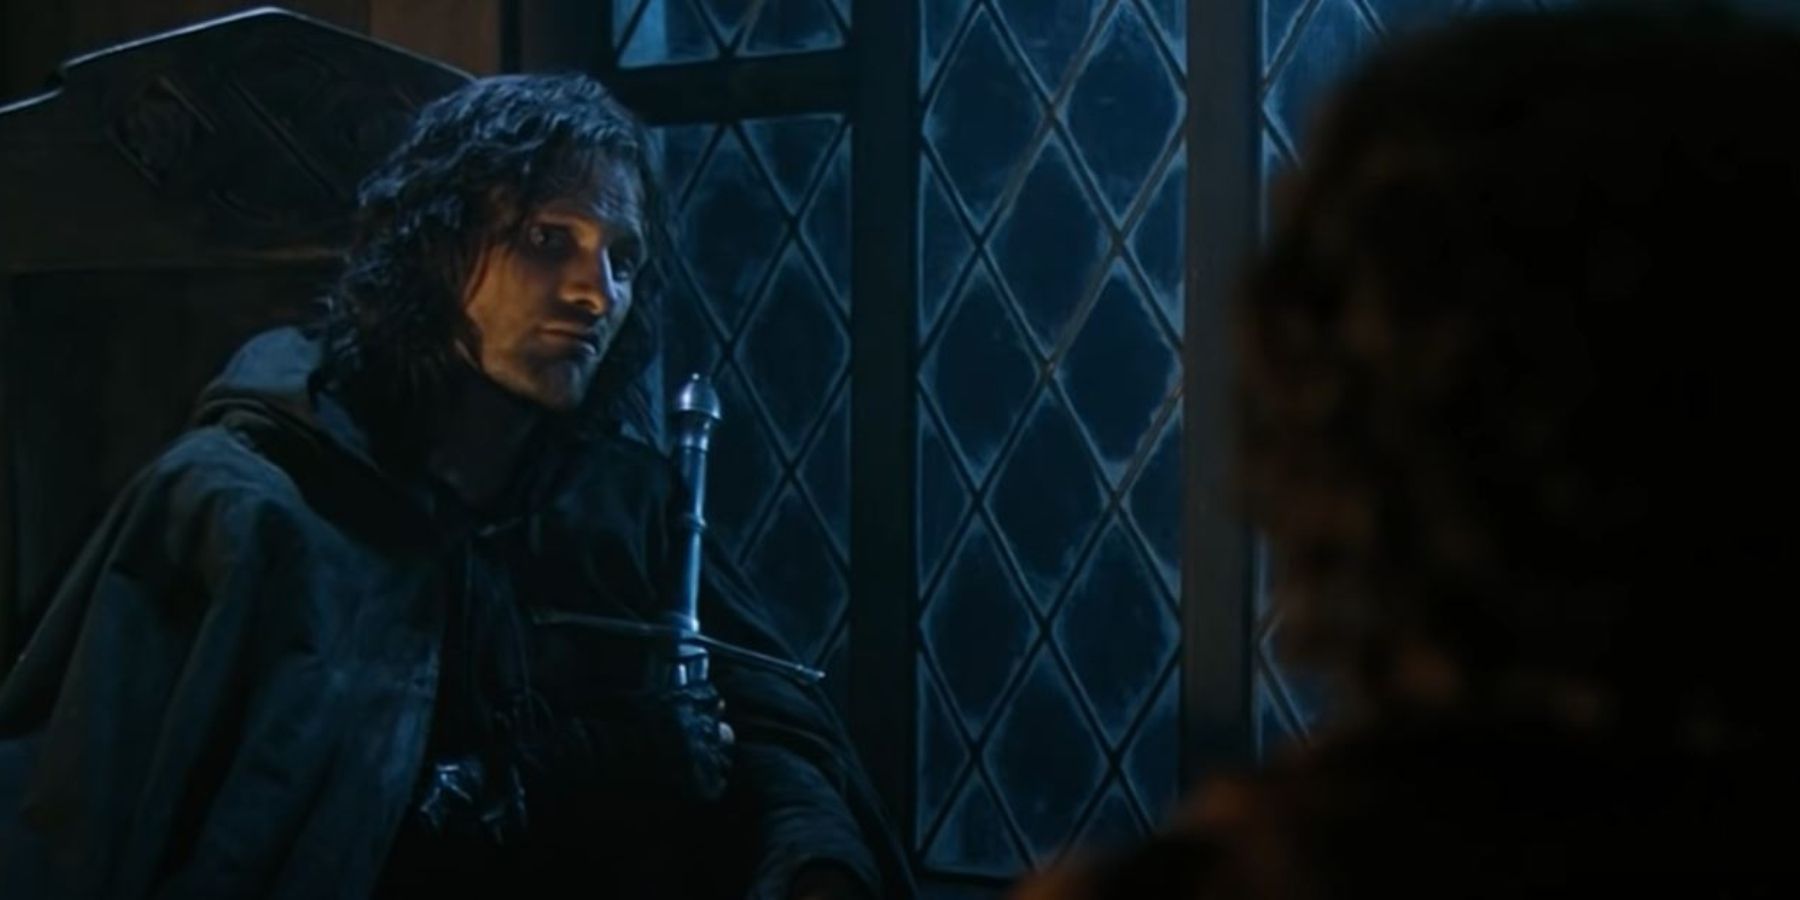 Aragorn tells Frodo about the ring wraiths